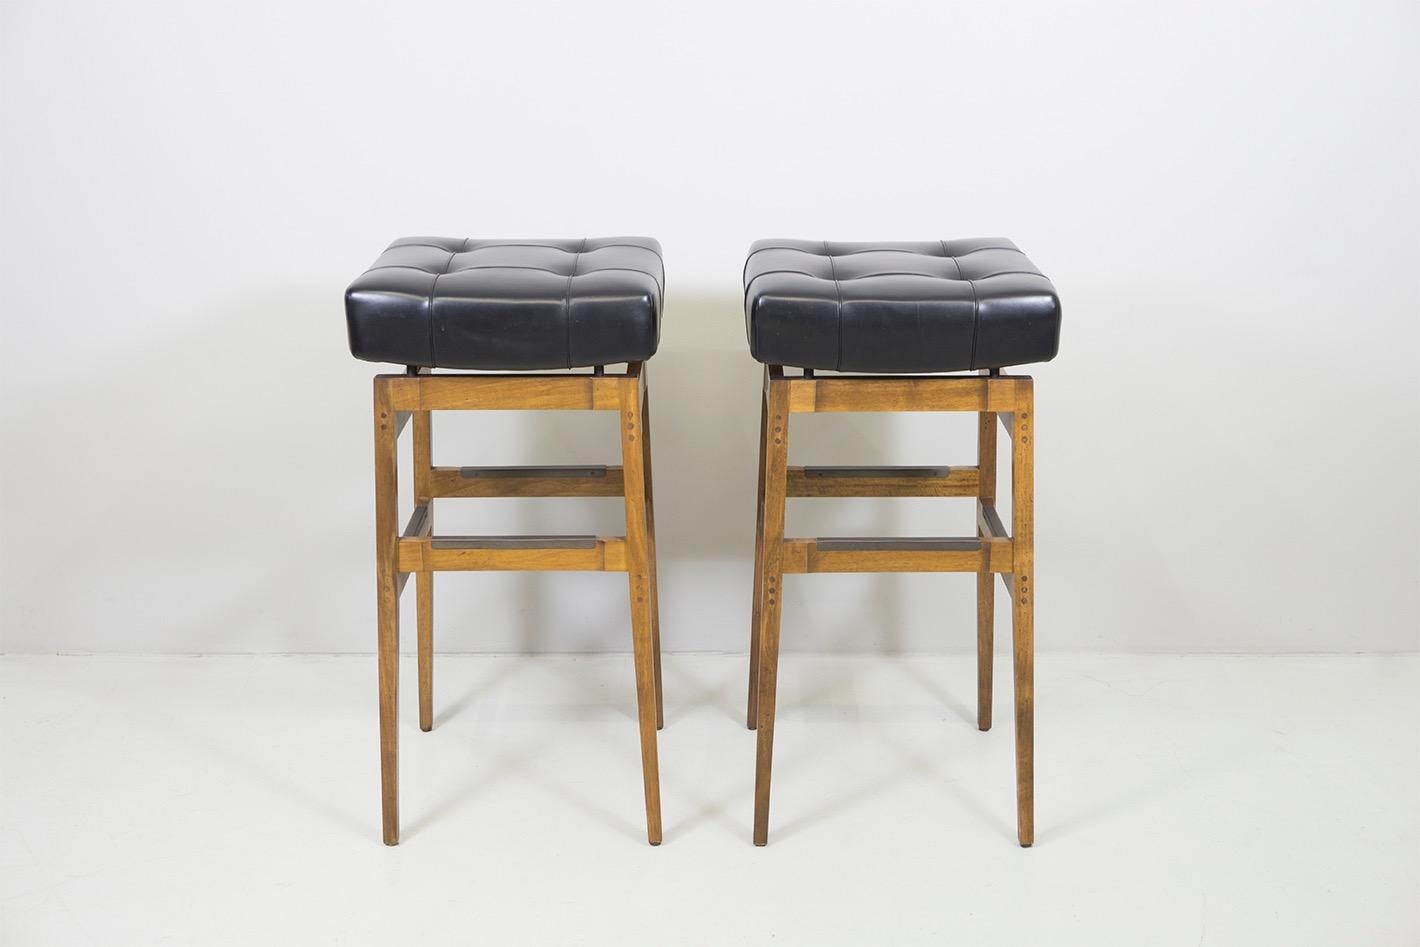 A pair of bar stools with a construction solid walnut and black lacquered metal, upholstery and vinyl cover. With manufacturer label 'Cassina'.
Dimensions: H. 82cm 41 x 41cm.
Design: Gianfranco Frattini, 1958.
Manufacturer: Cassina, Italy.
 